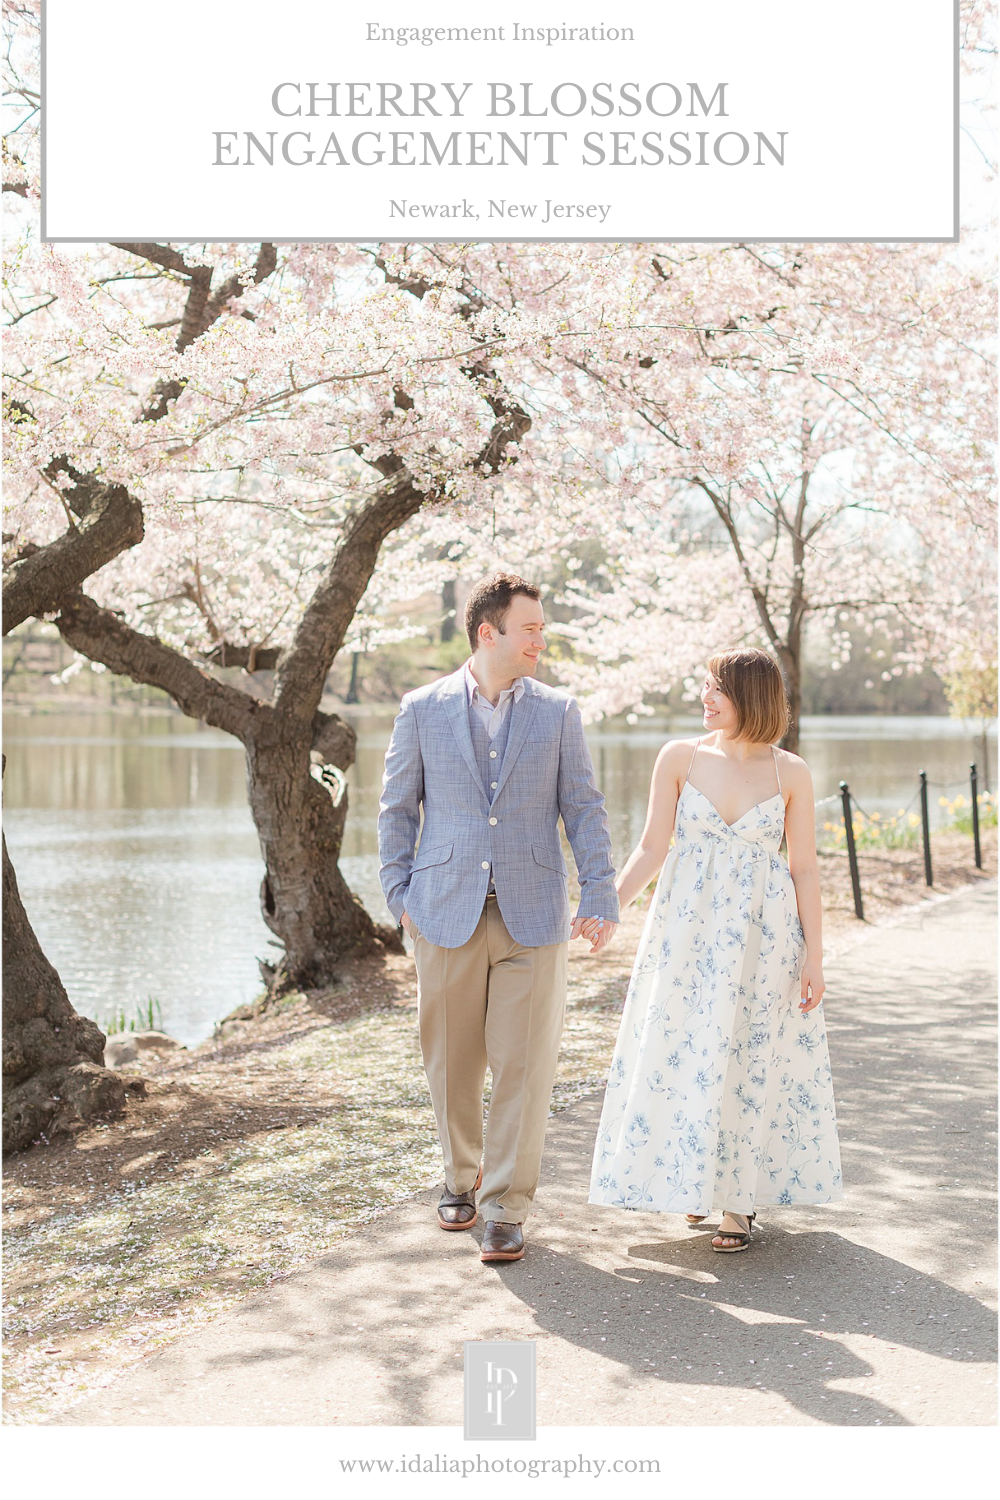 Cherry blossom Branch Brook Park engagement session in the springtime with NJ wedding photographer Idalia Photography